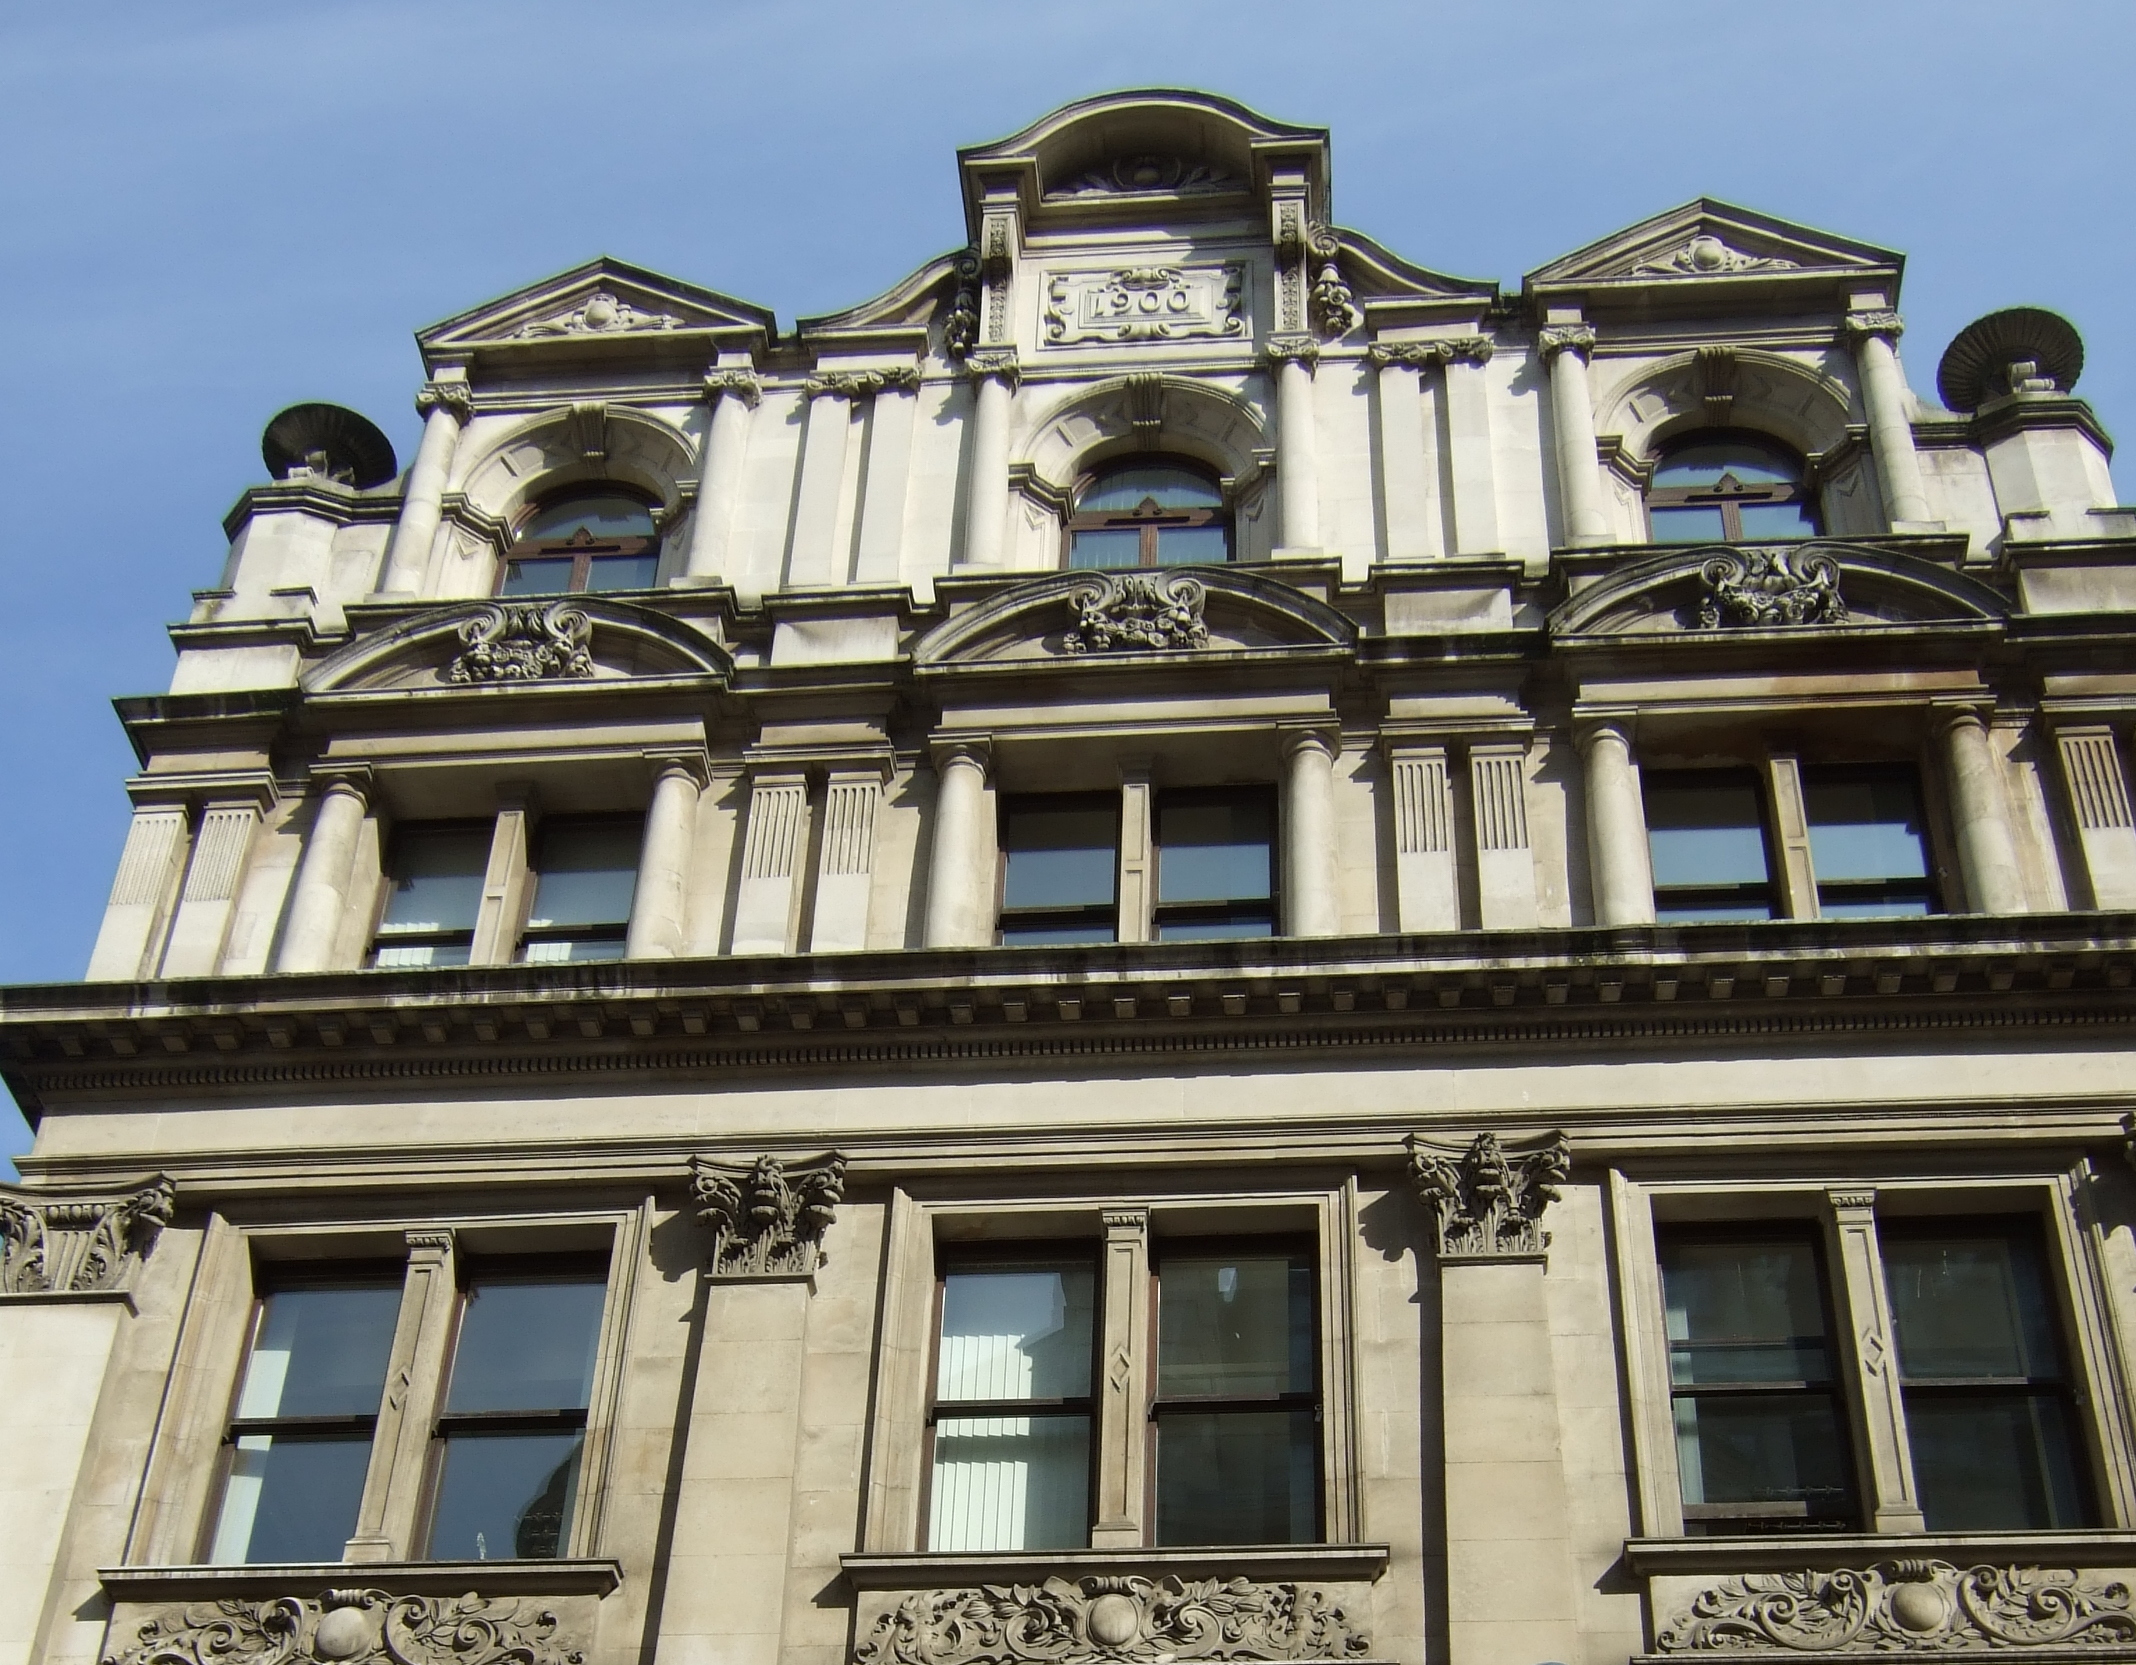 Upper storeys of Fenchurch Street aspect showing more eclcticist detailing